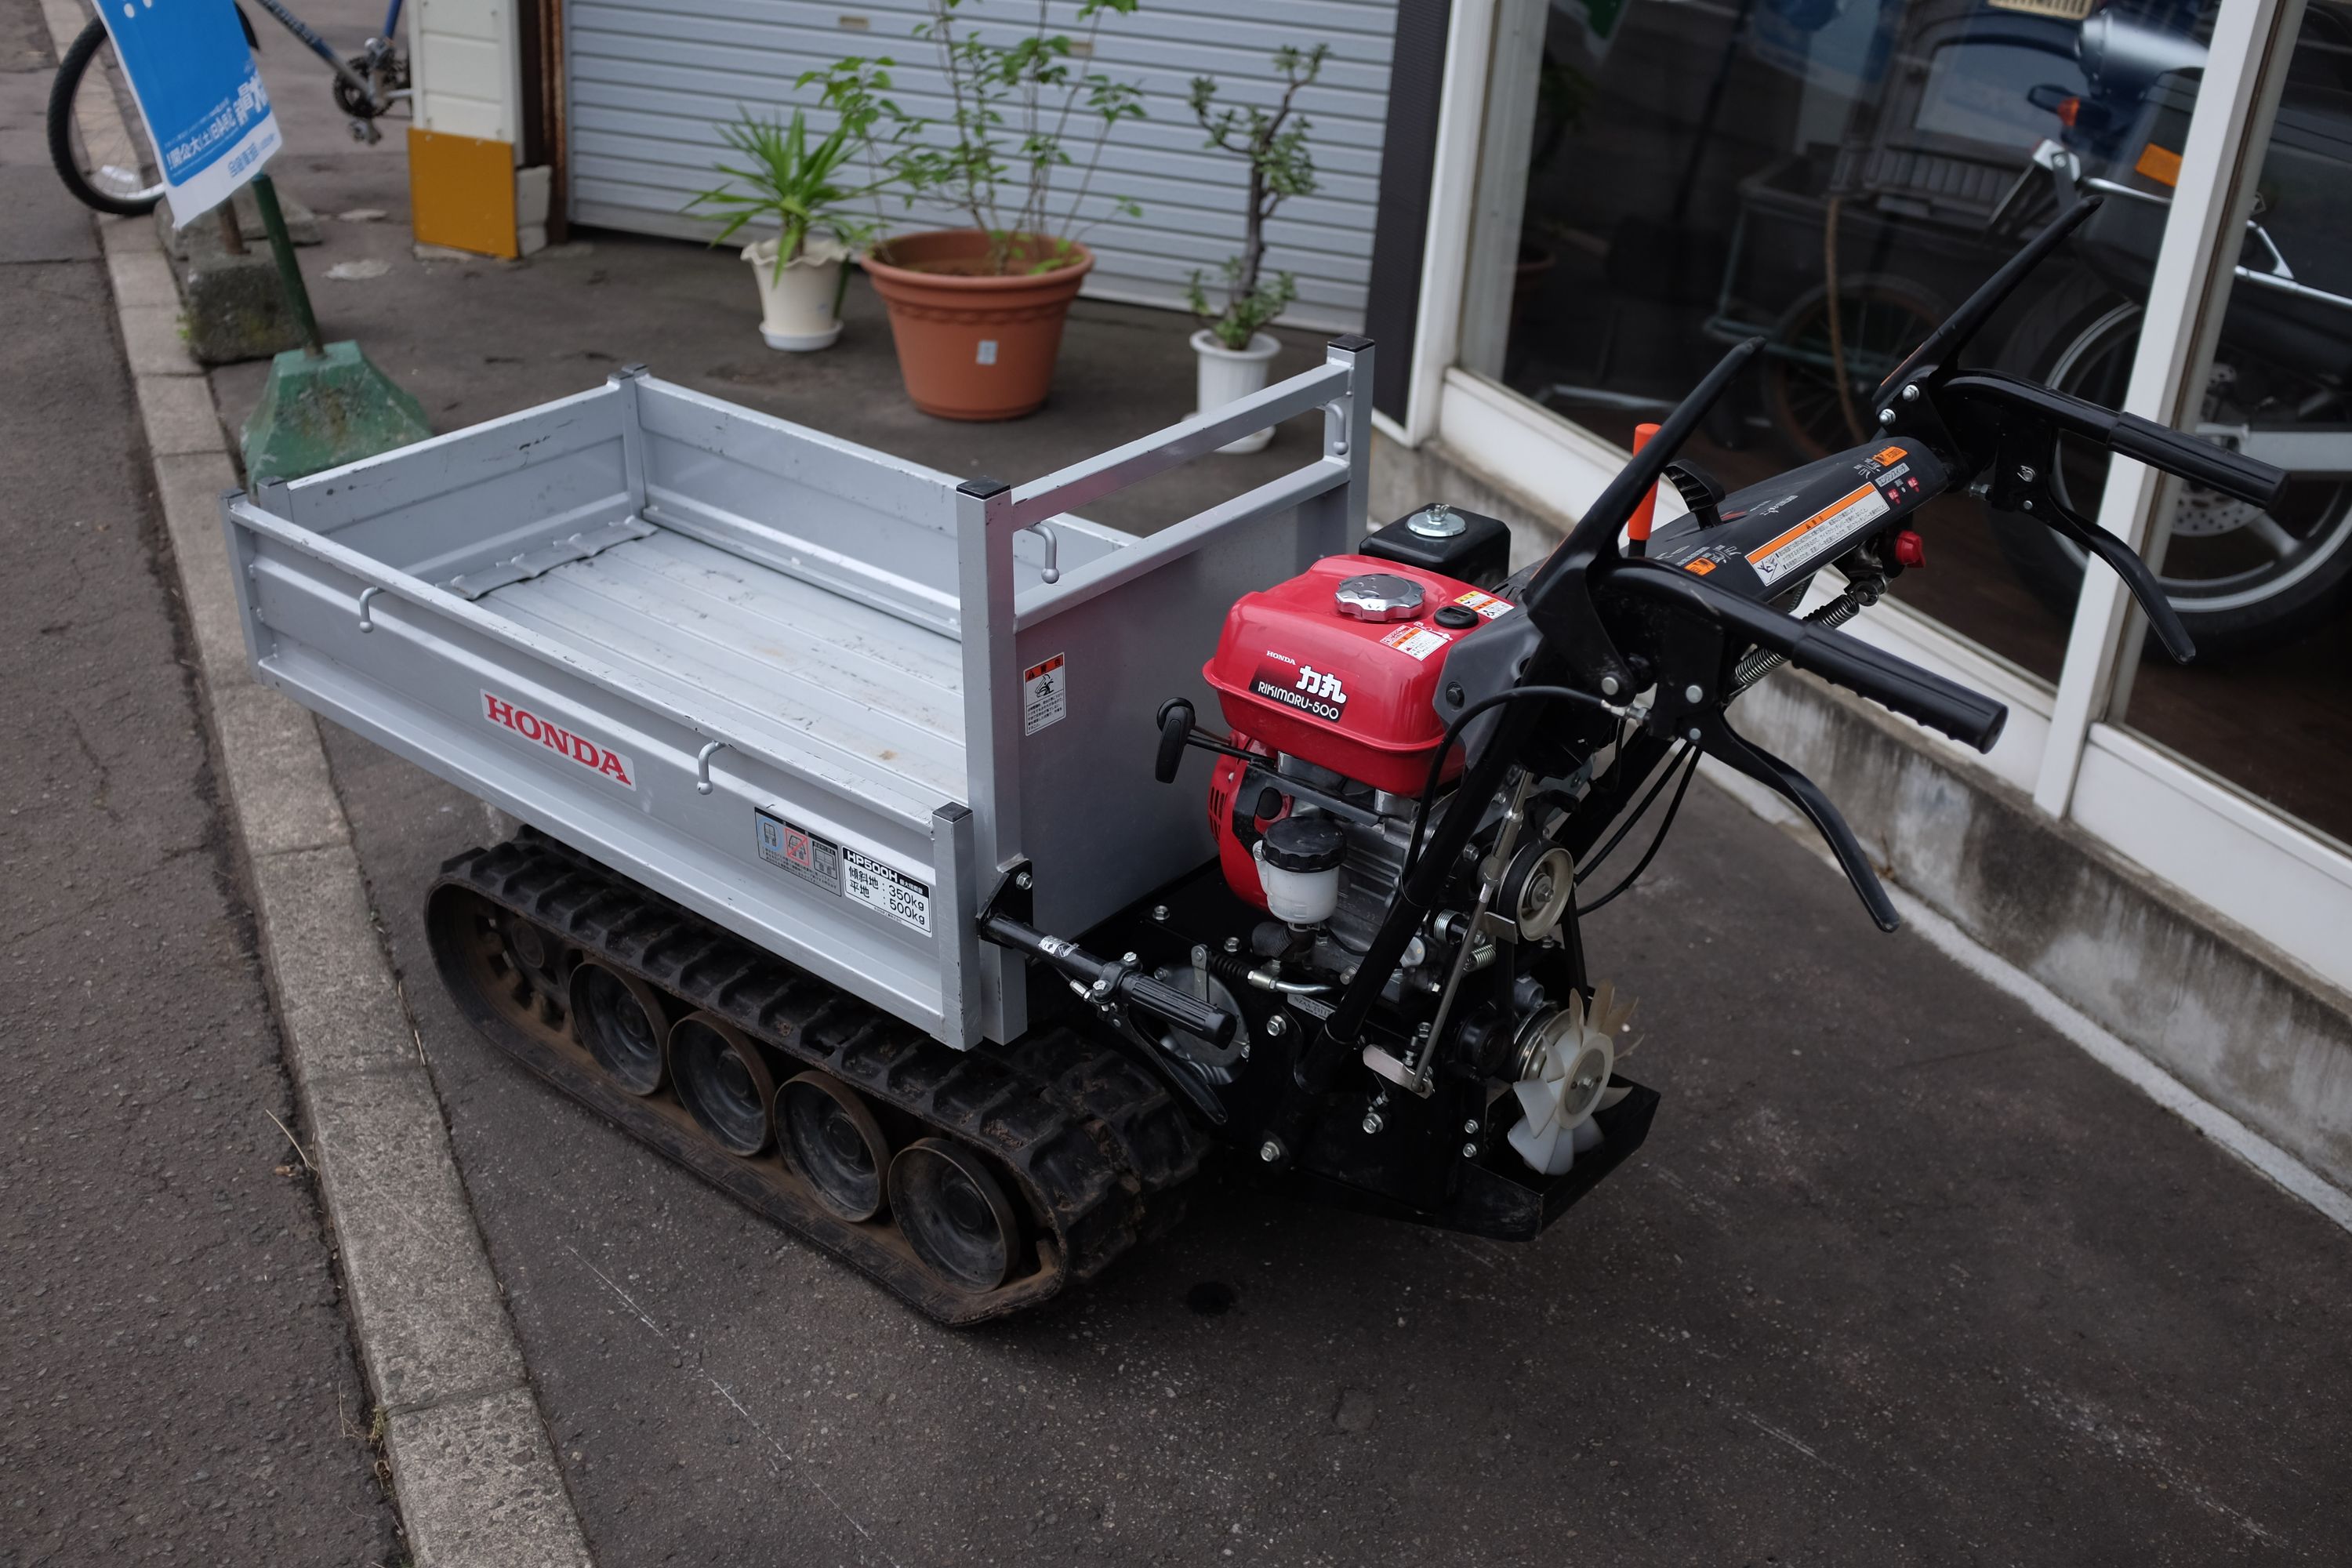 A tiny, tracked Honda transporter with a lawnmower engine.